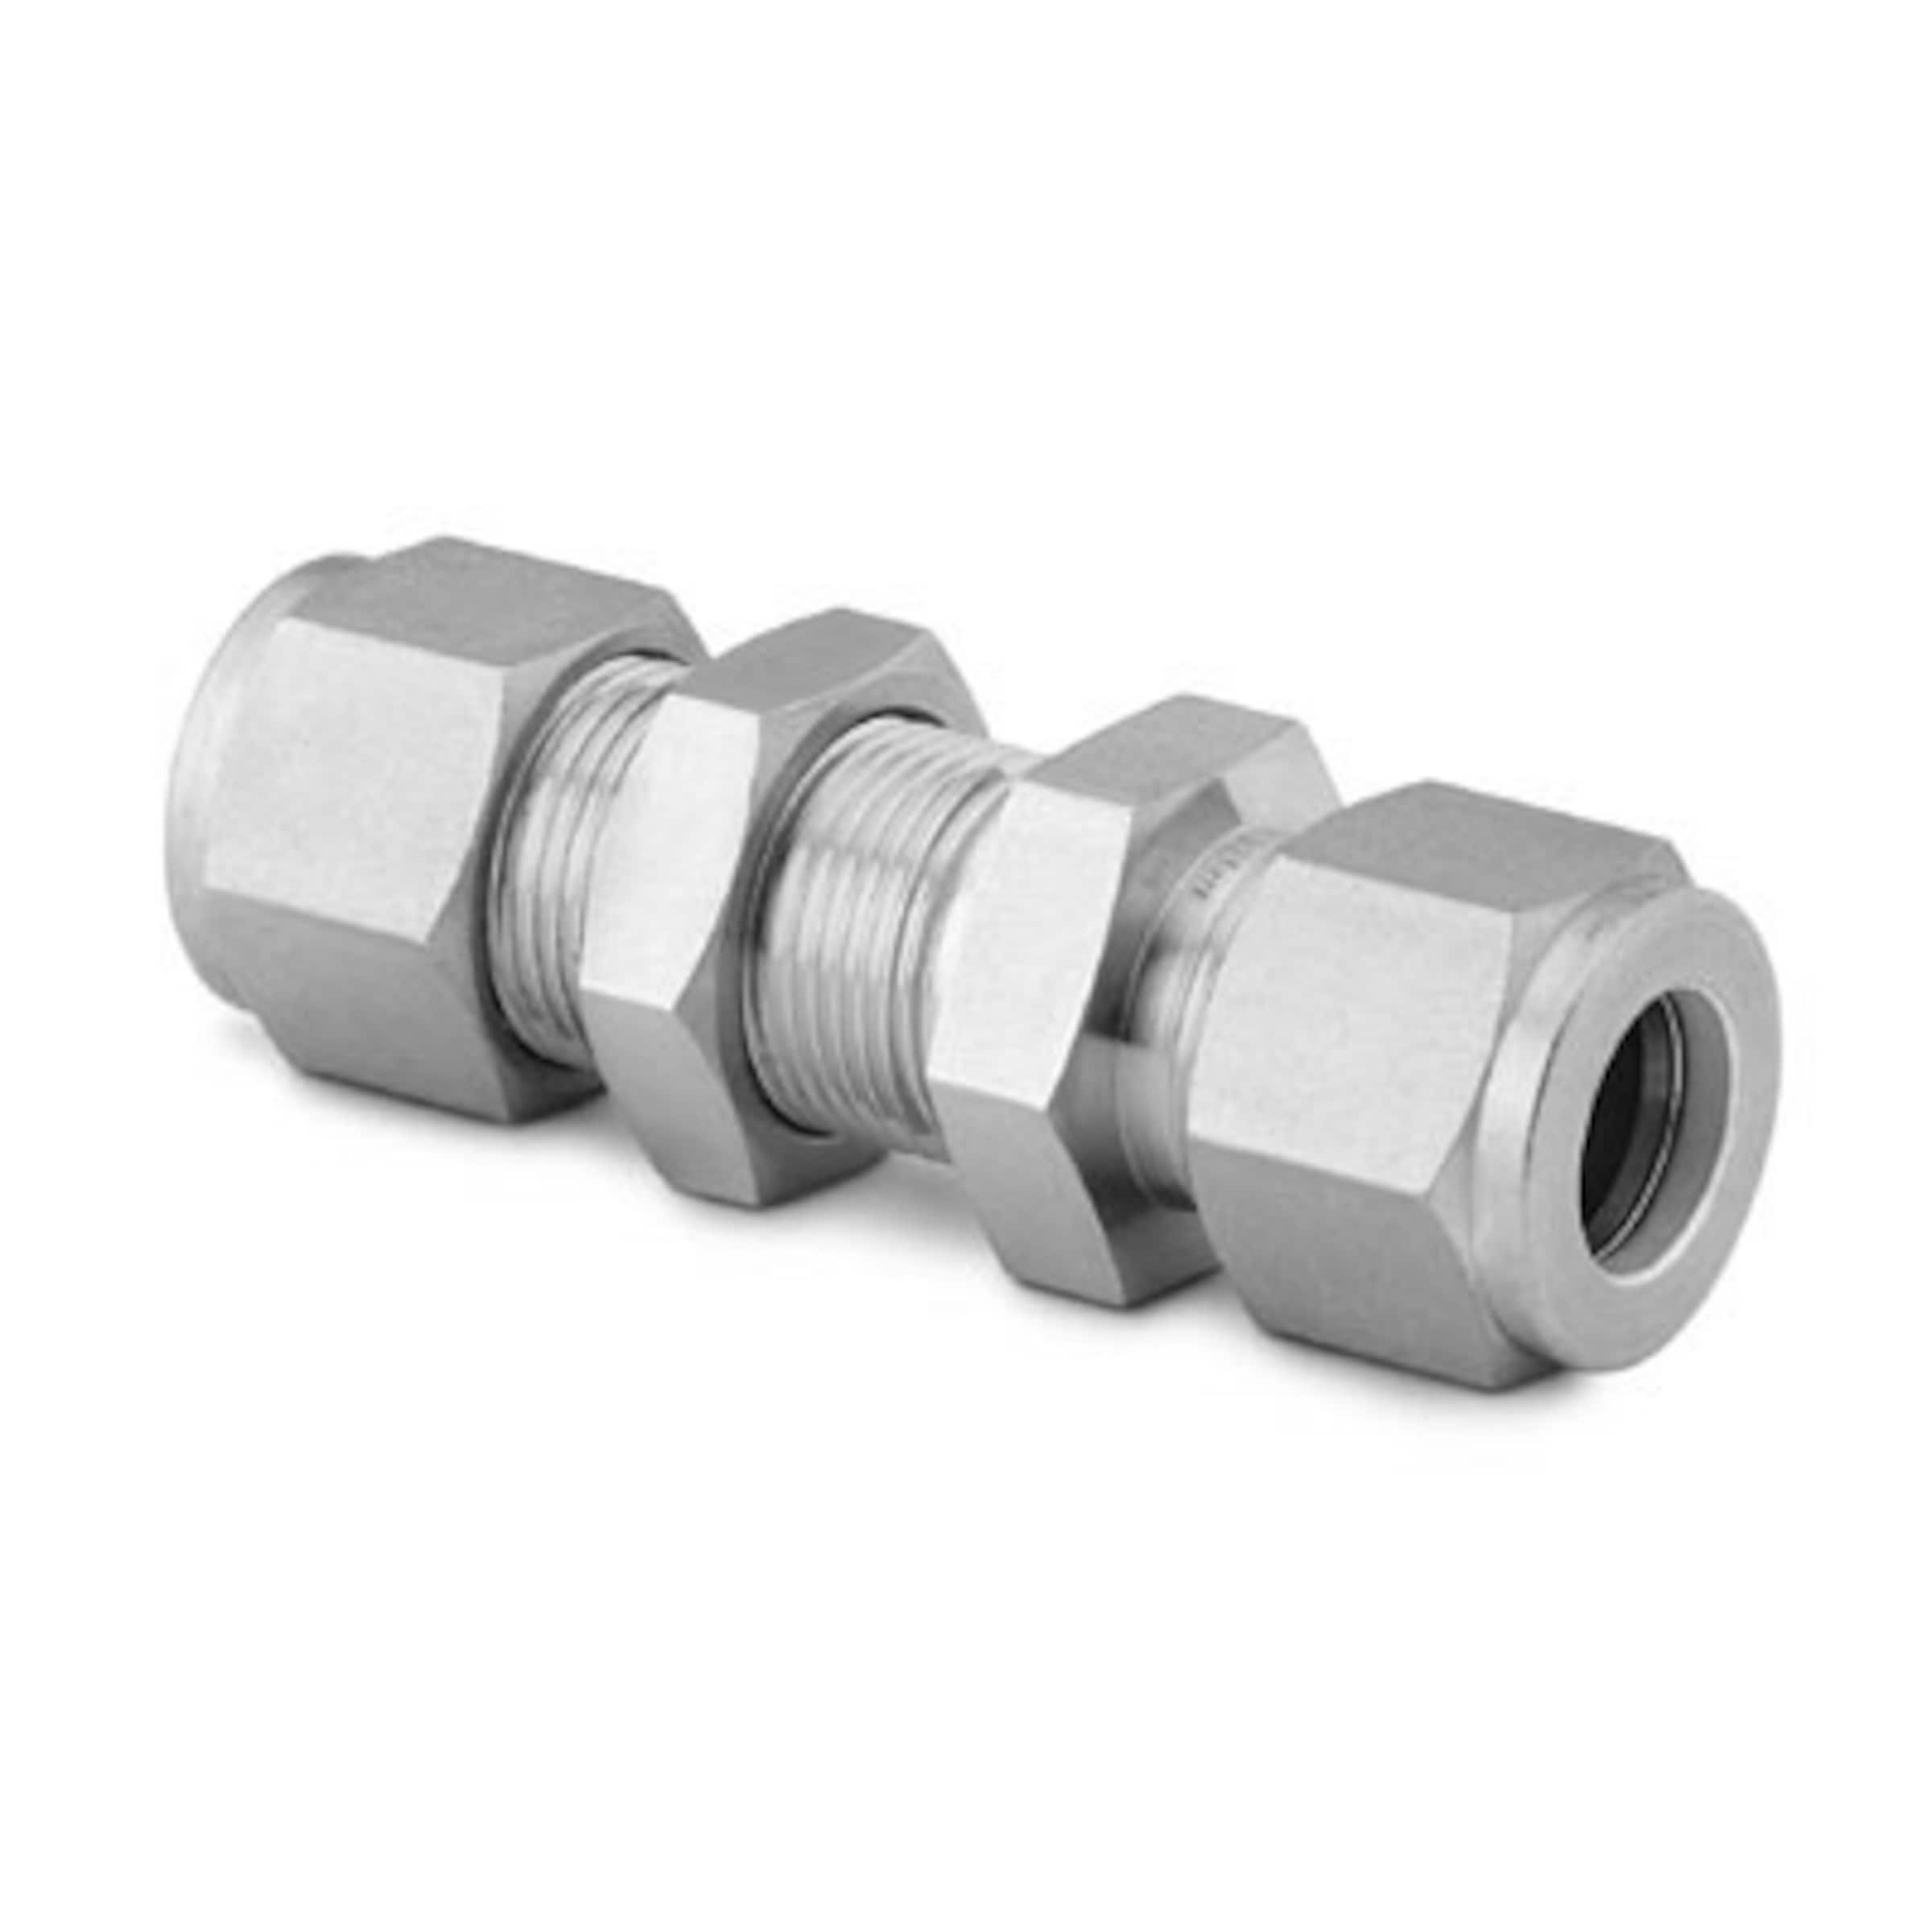 3/4 Stainless Steel Bulkhead Fitting (With Buna-N Gasket)